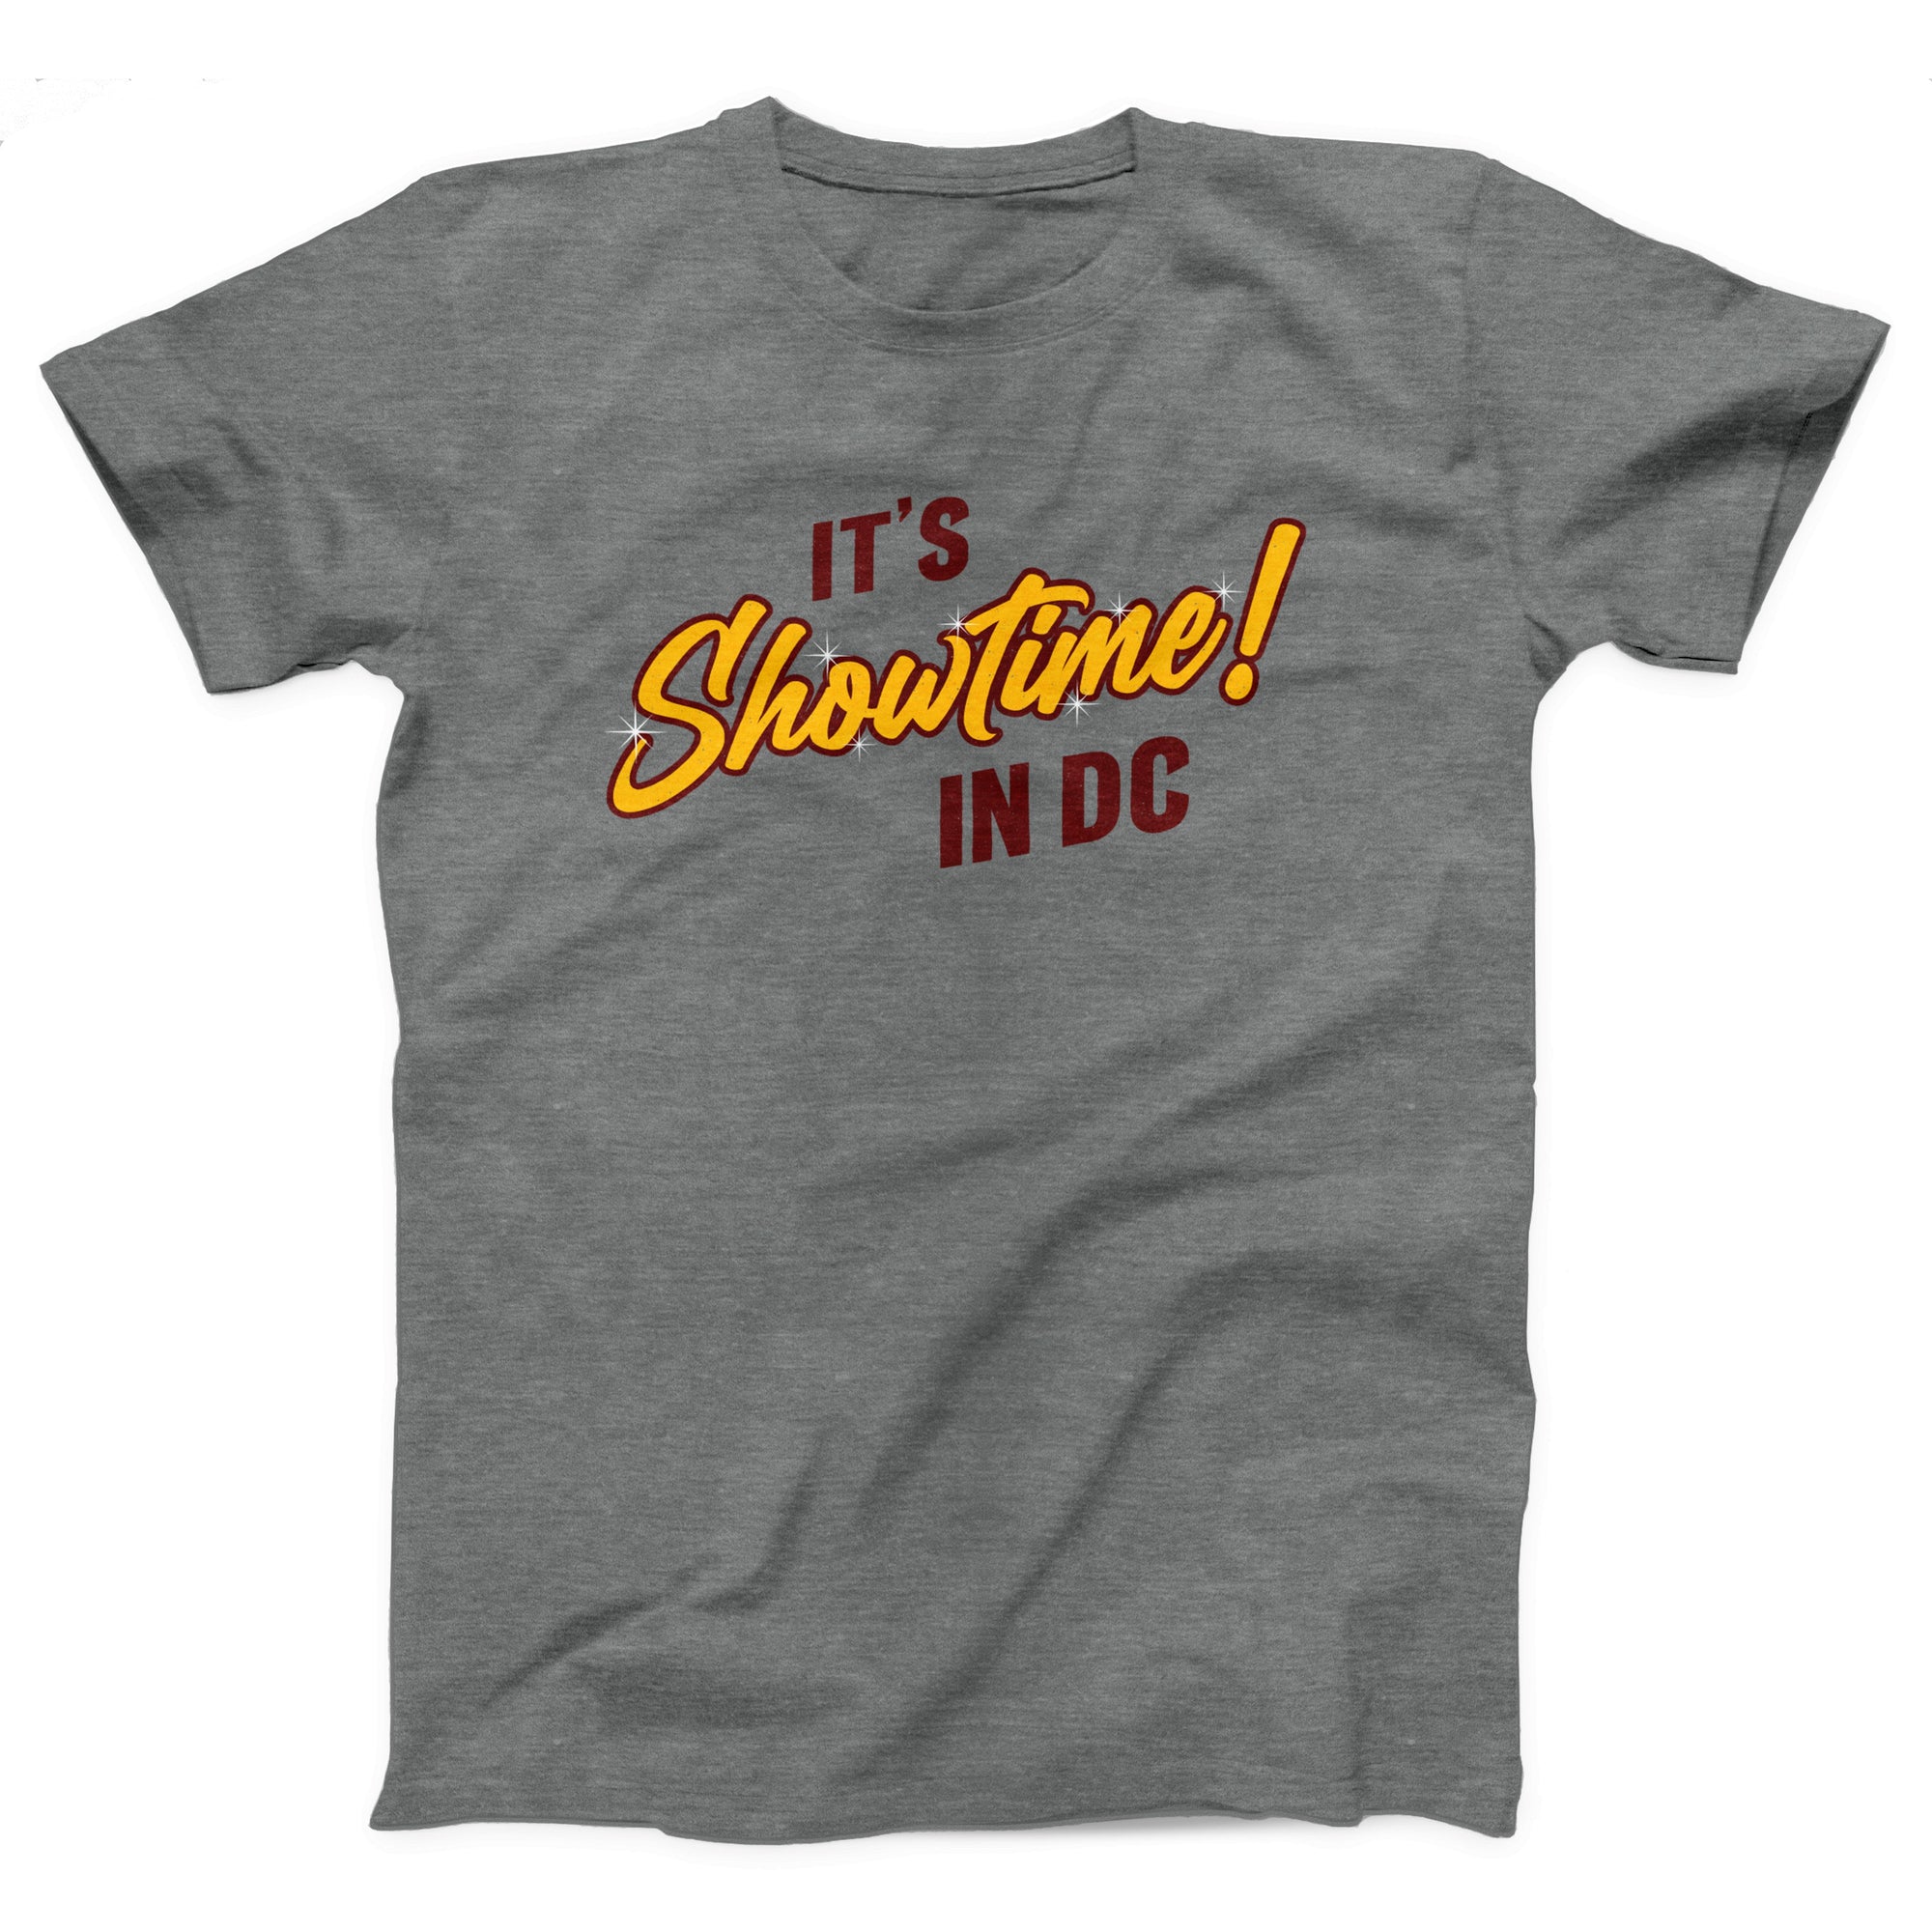 It's Showtime in DC Adult Unisex T-Shirt - Twisted Gorilla